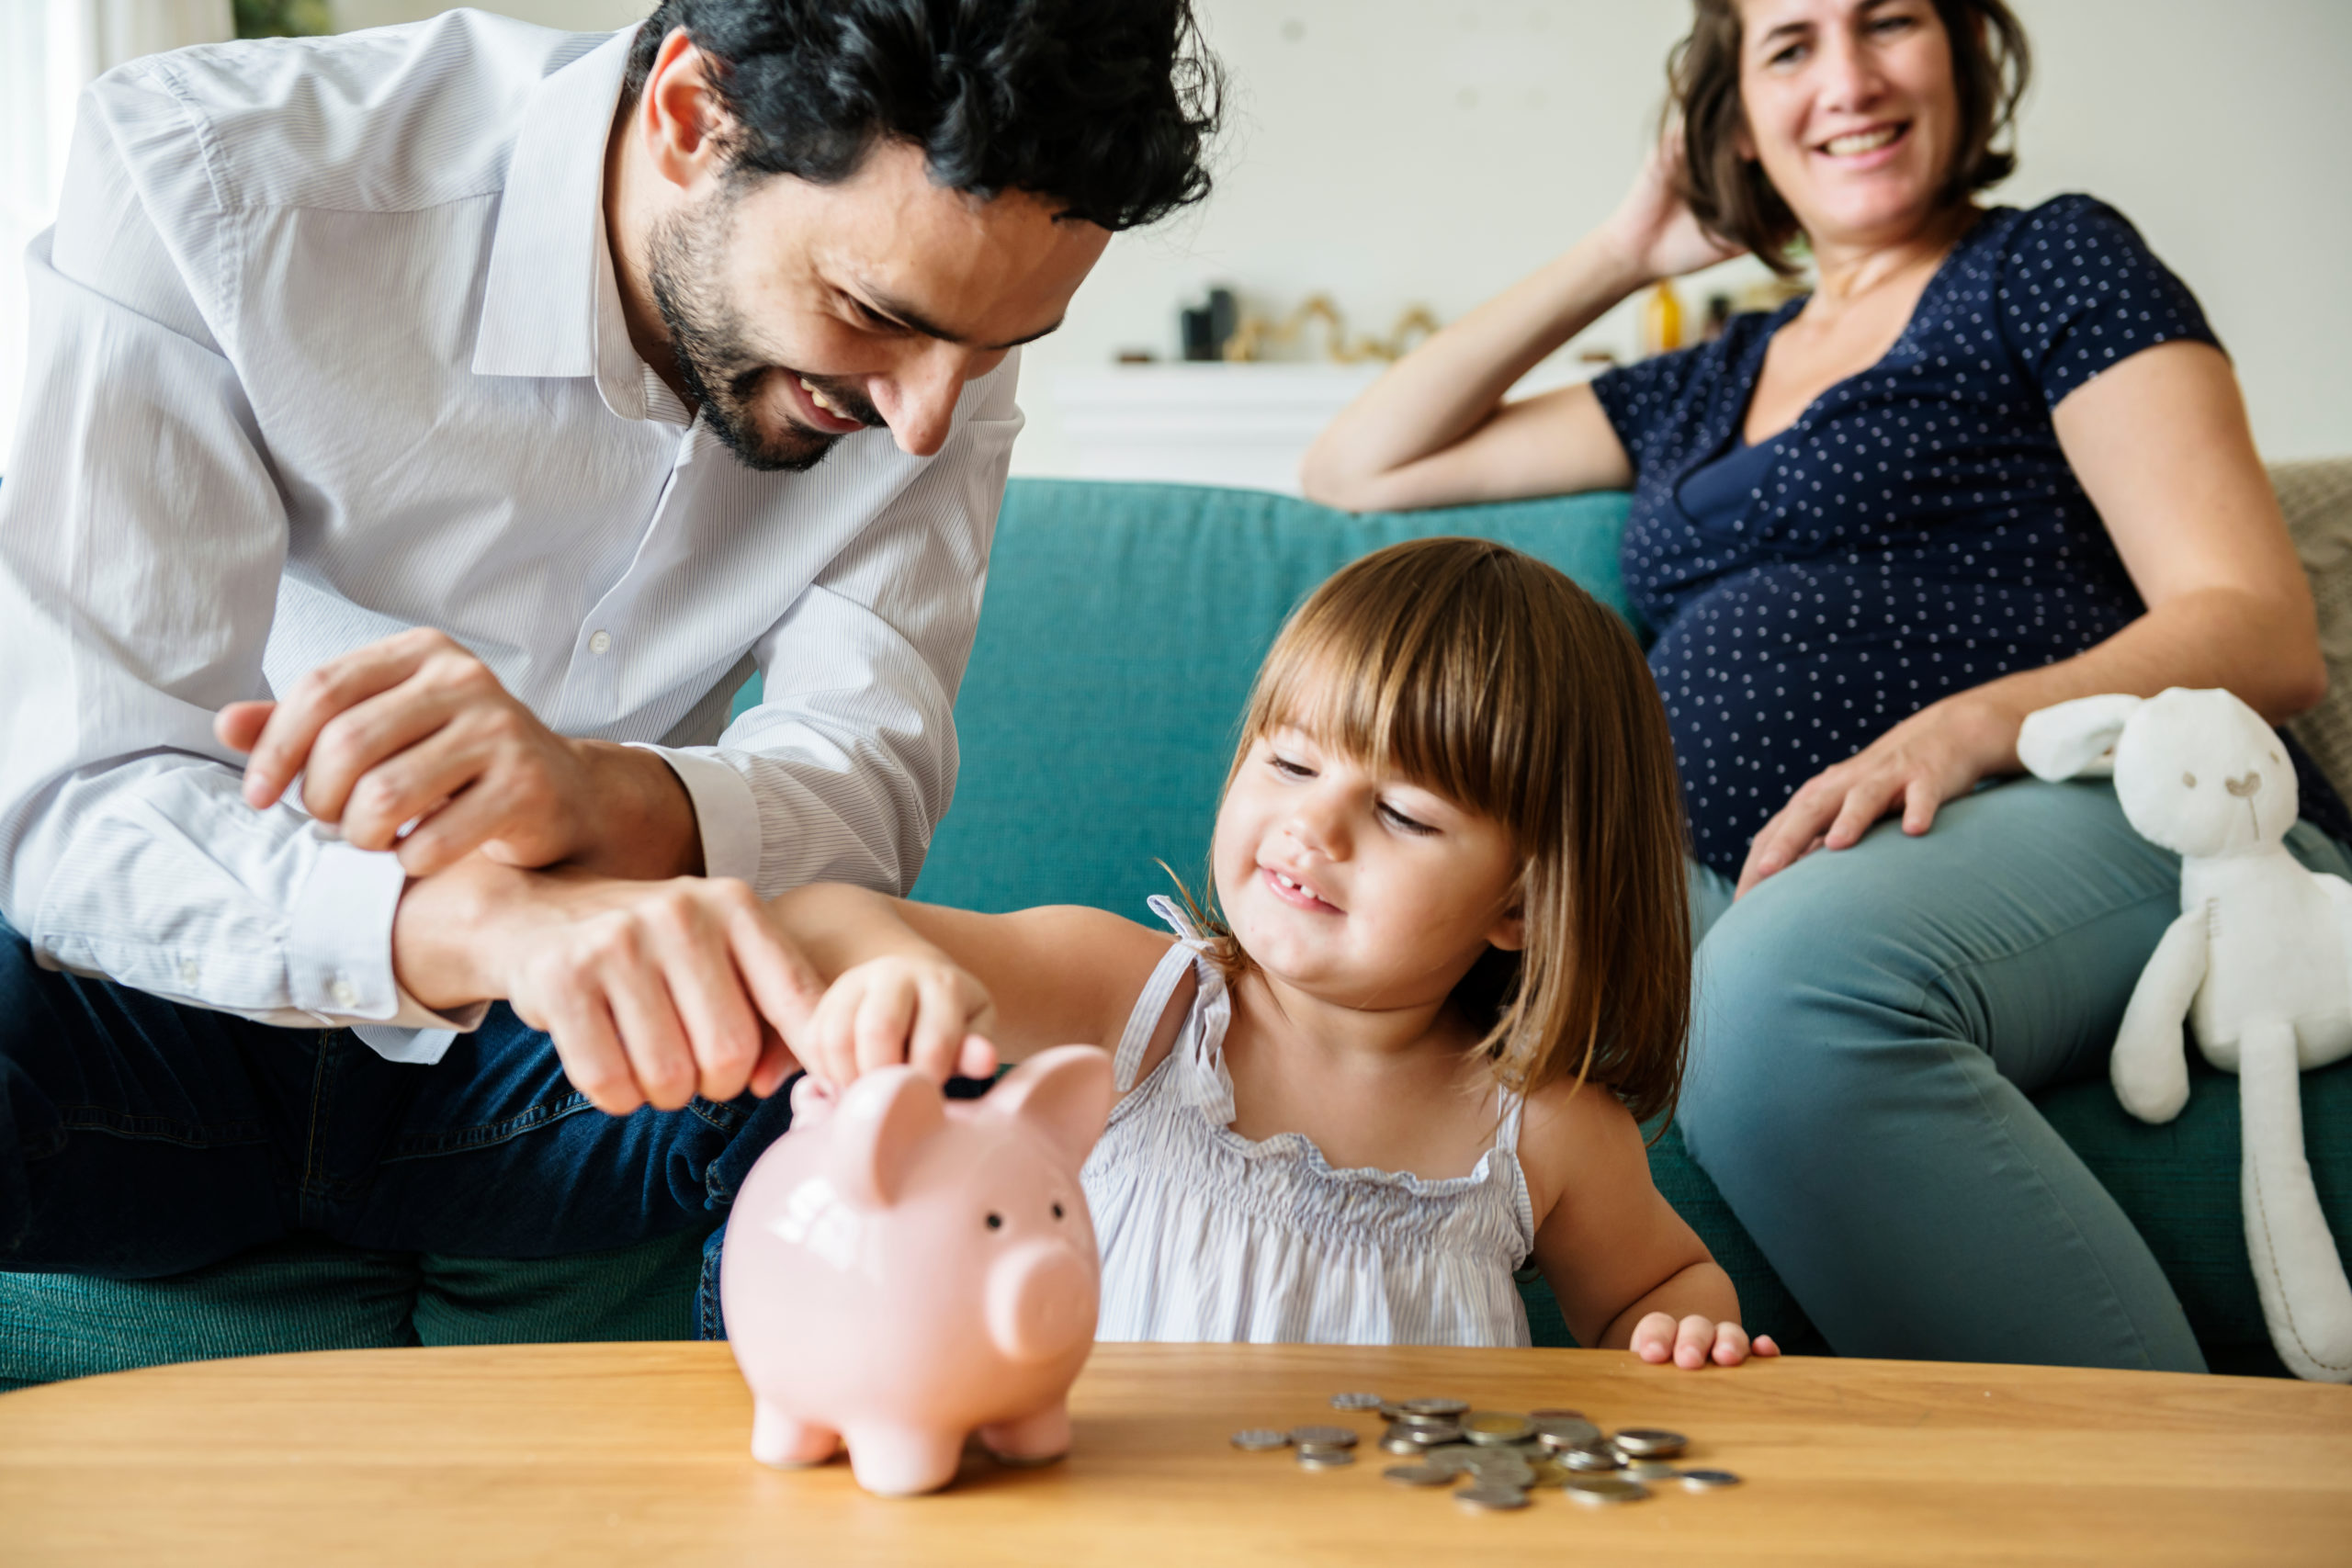 father helping young daughter put change in light pink piggy bank on a light brown wood table